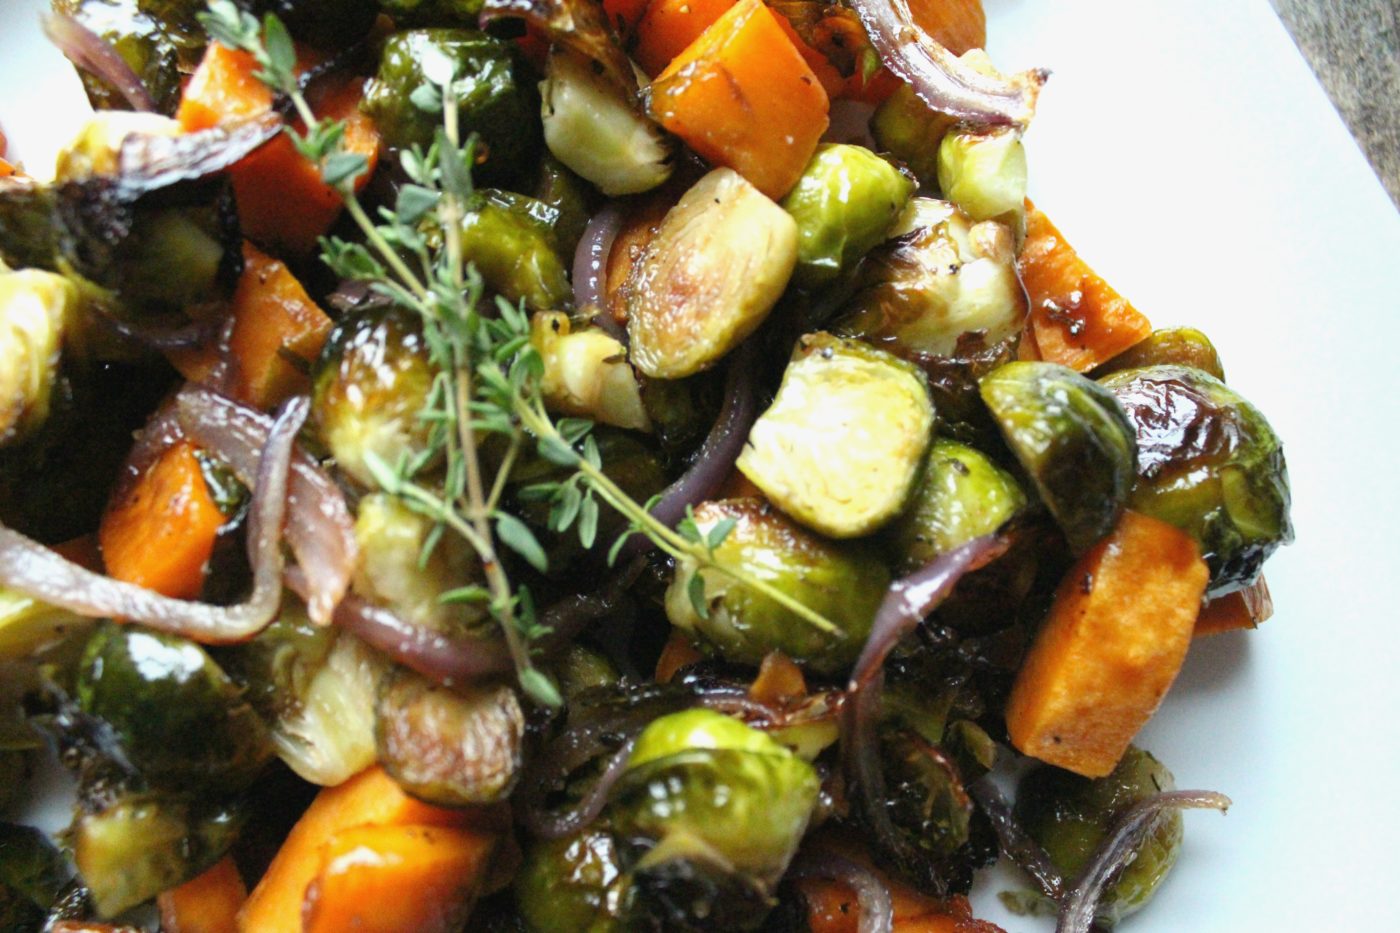 Roasted vegetables are one of the best ways to enjoy vegetables. Roasting them with a maple balsamic glaze is even better.